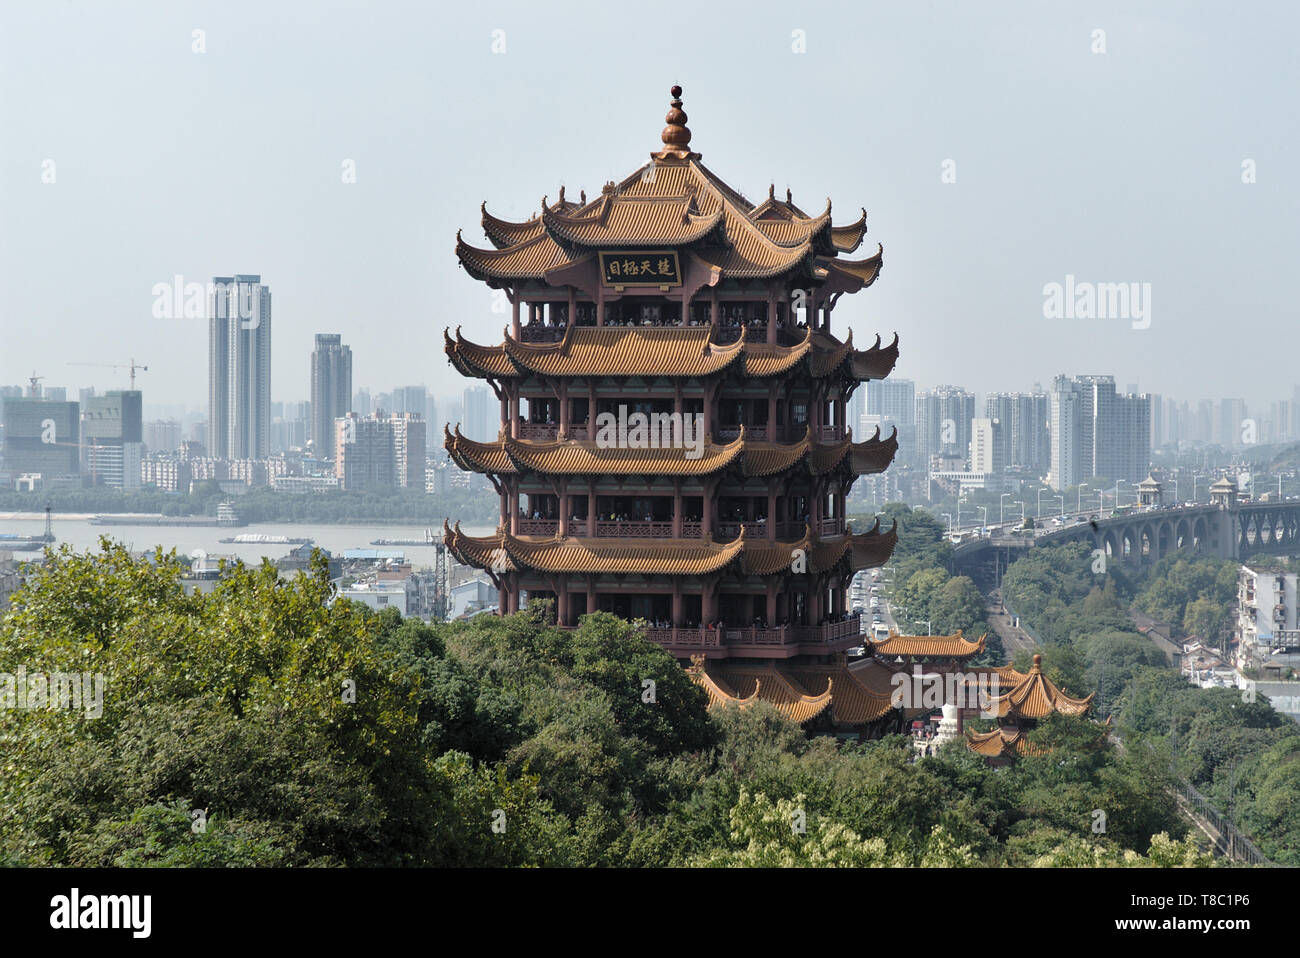 View on Yellow Crane Tower in Wuhan, Hubei province, China Stock Photo